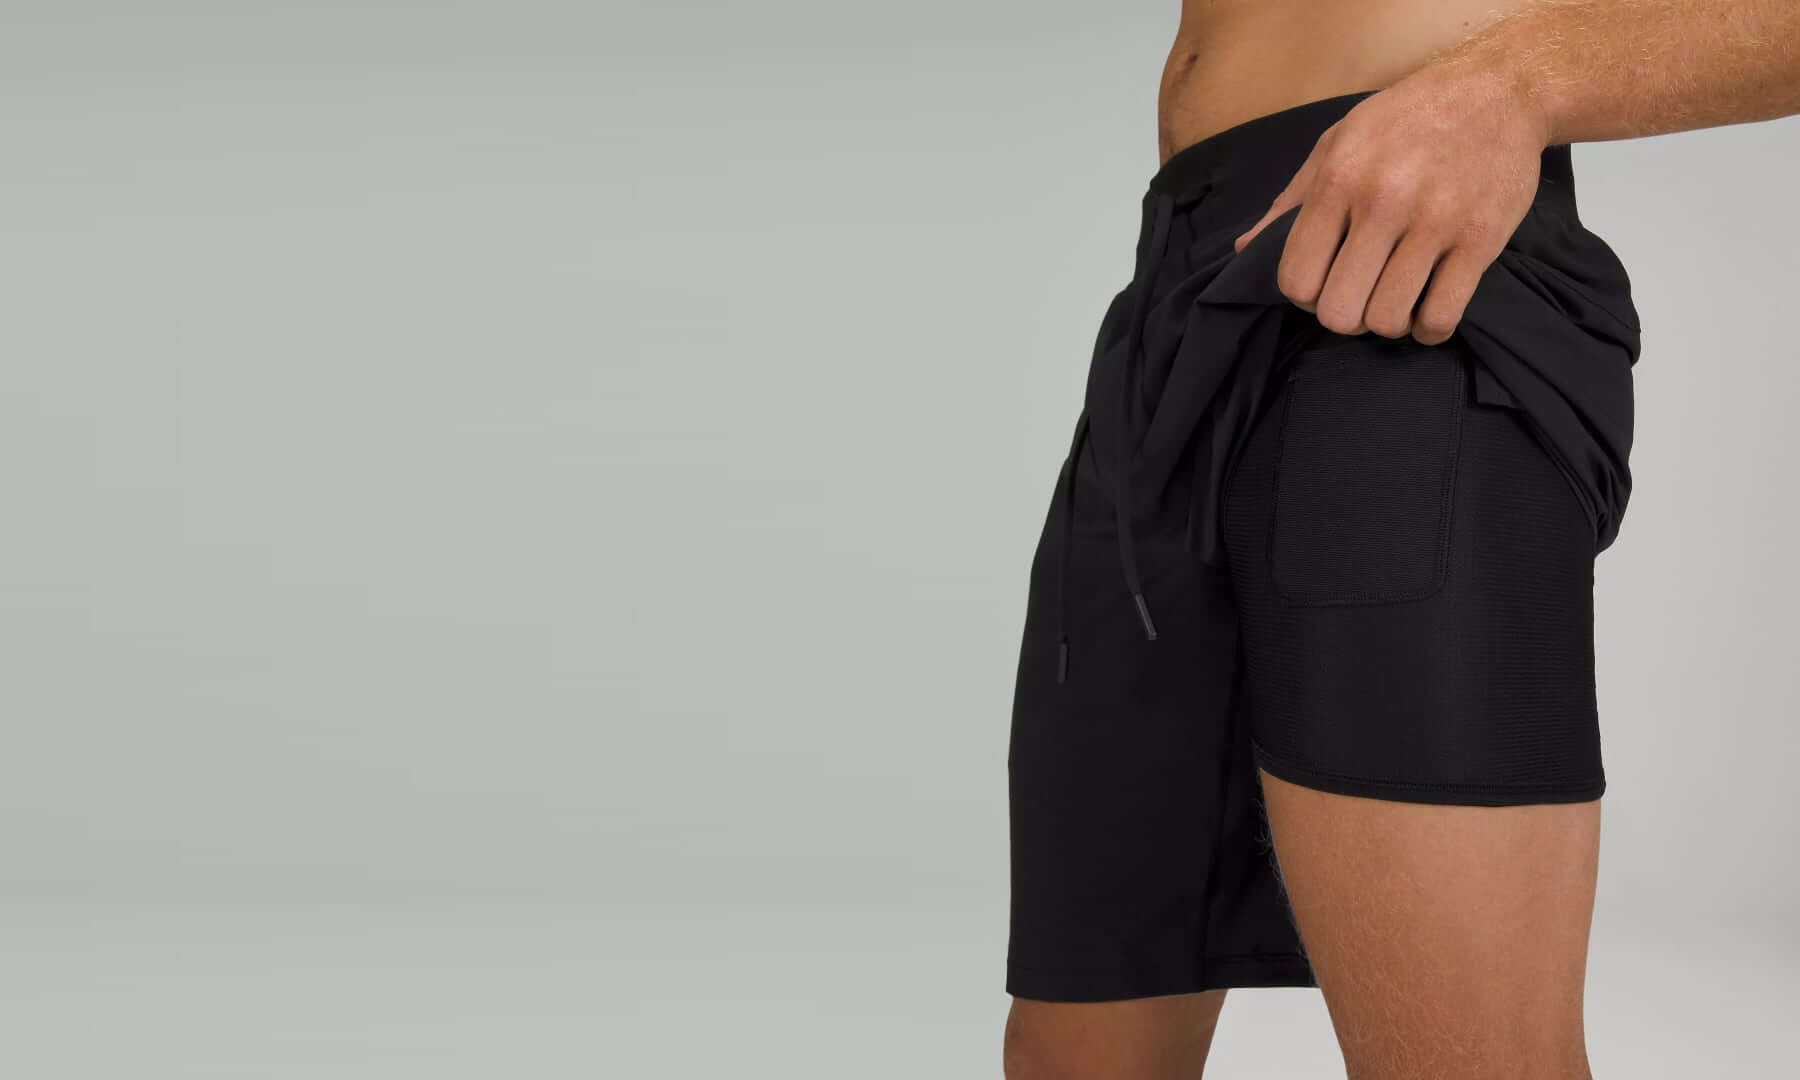 Best men's 2-in-1 workout shorts with liners 2021